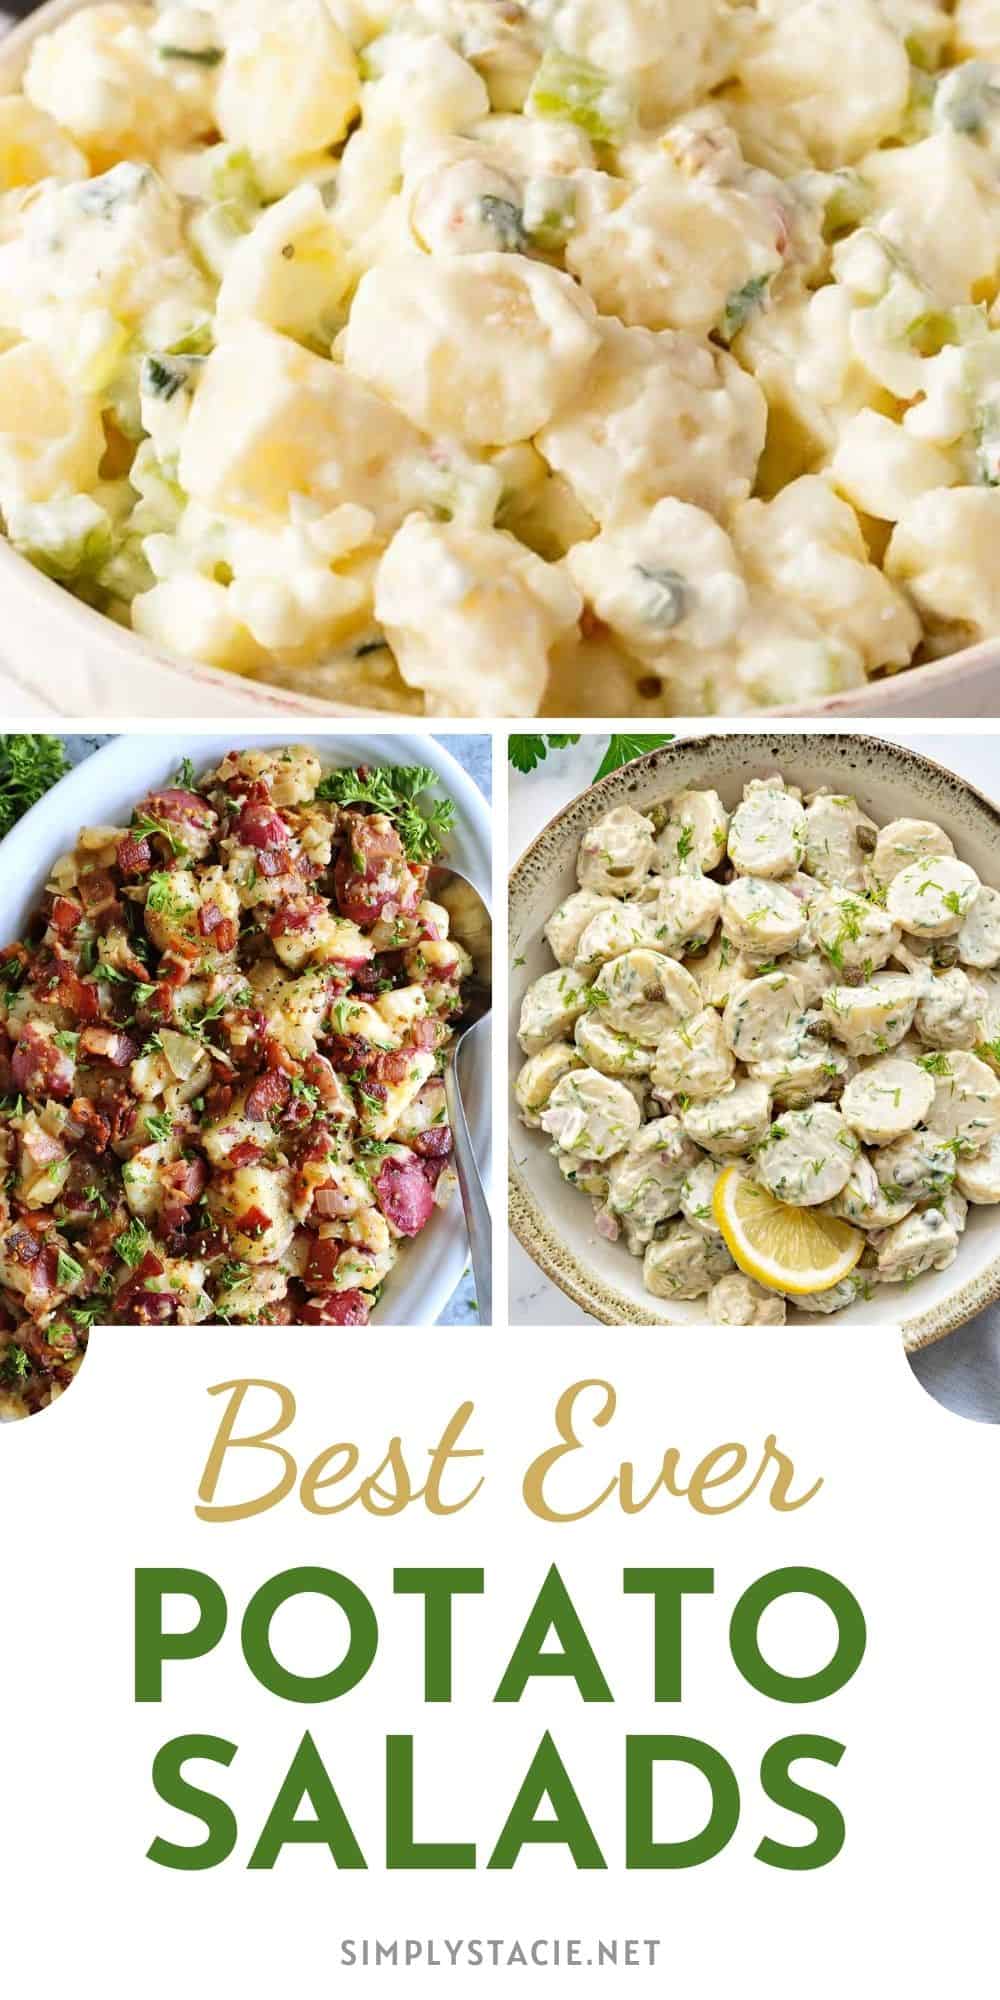 Potato Salad Recipes to Try This Summer - You are going to want to save these easy recipes for your next barbecue or picnic!